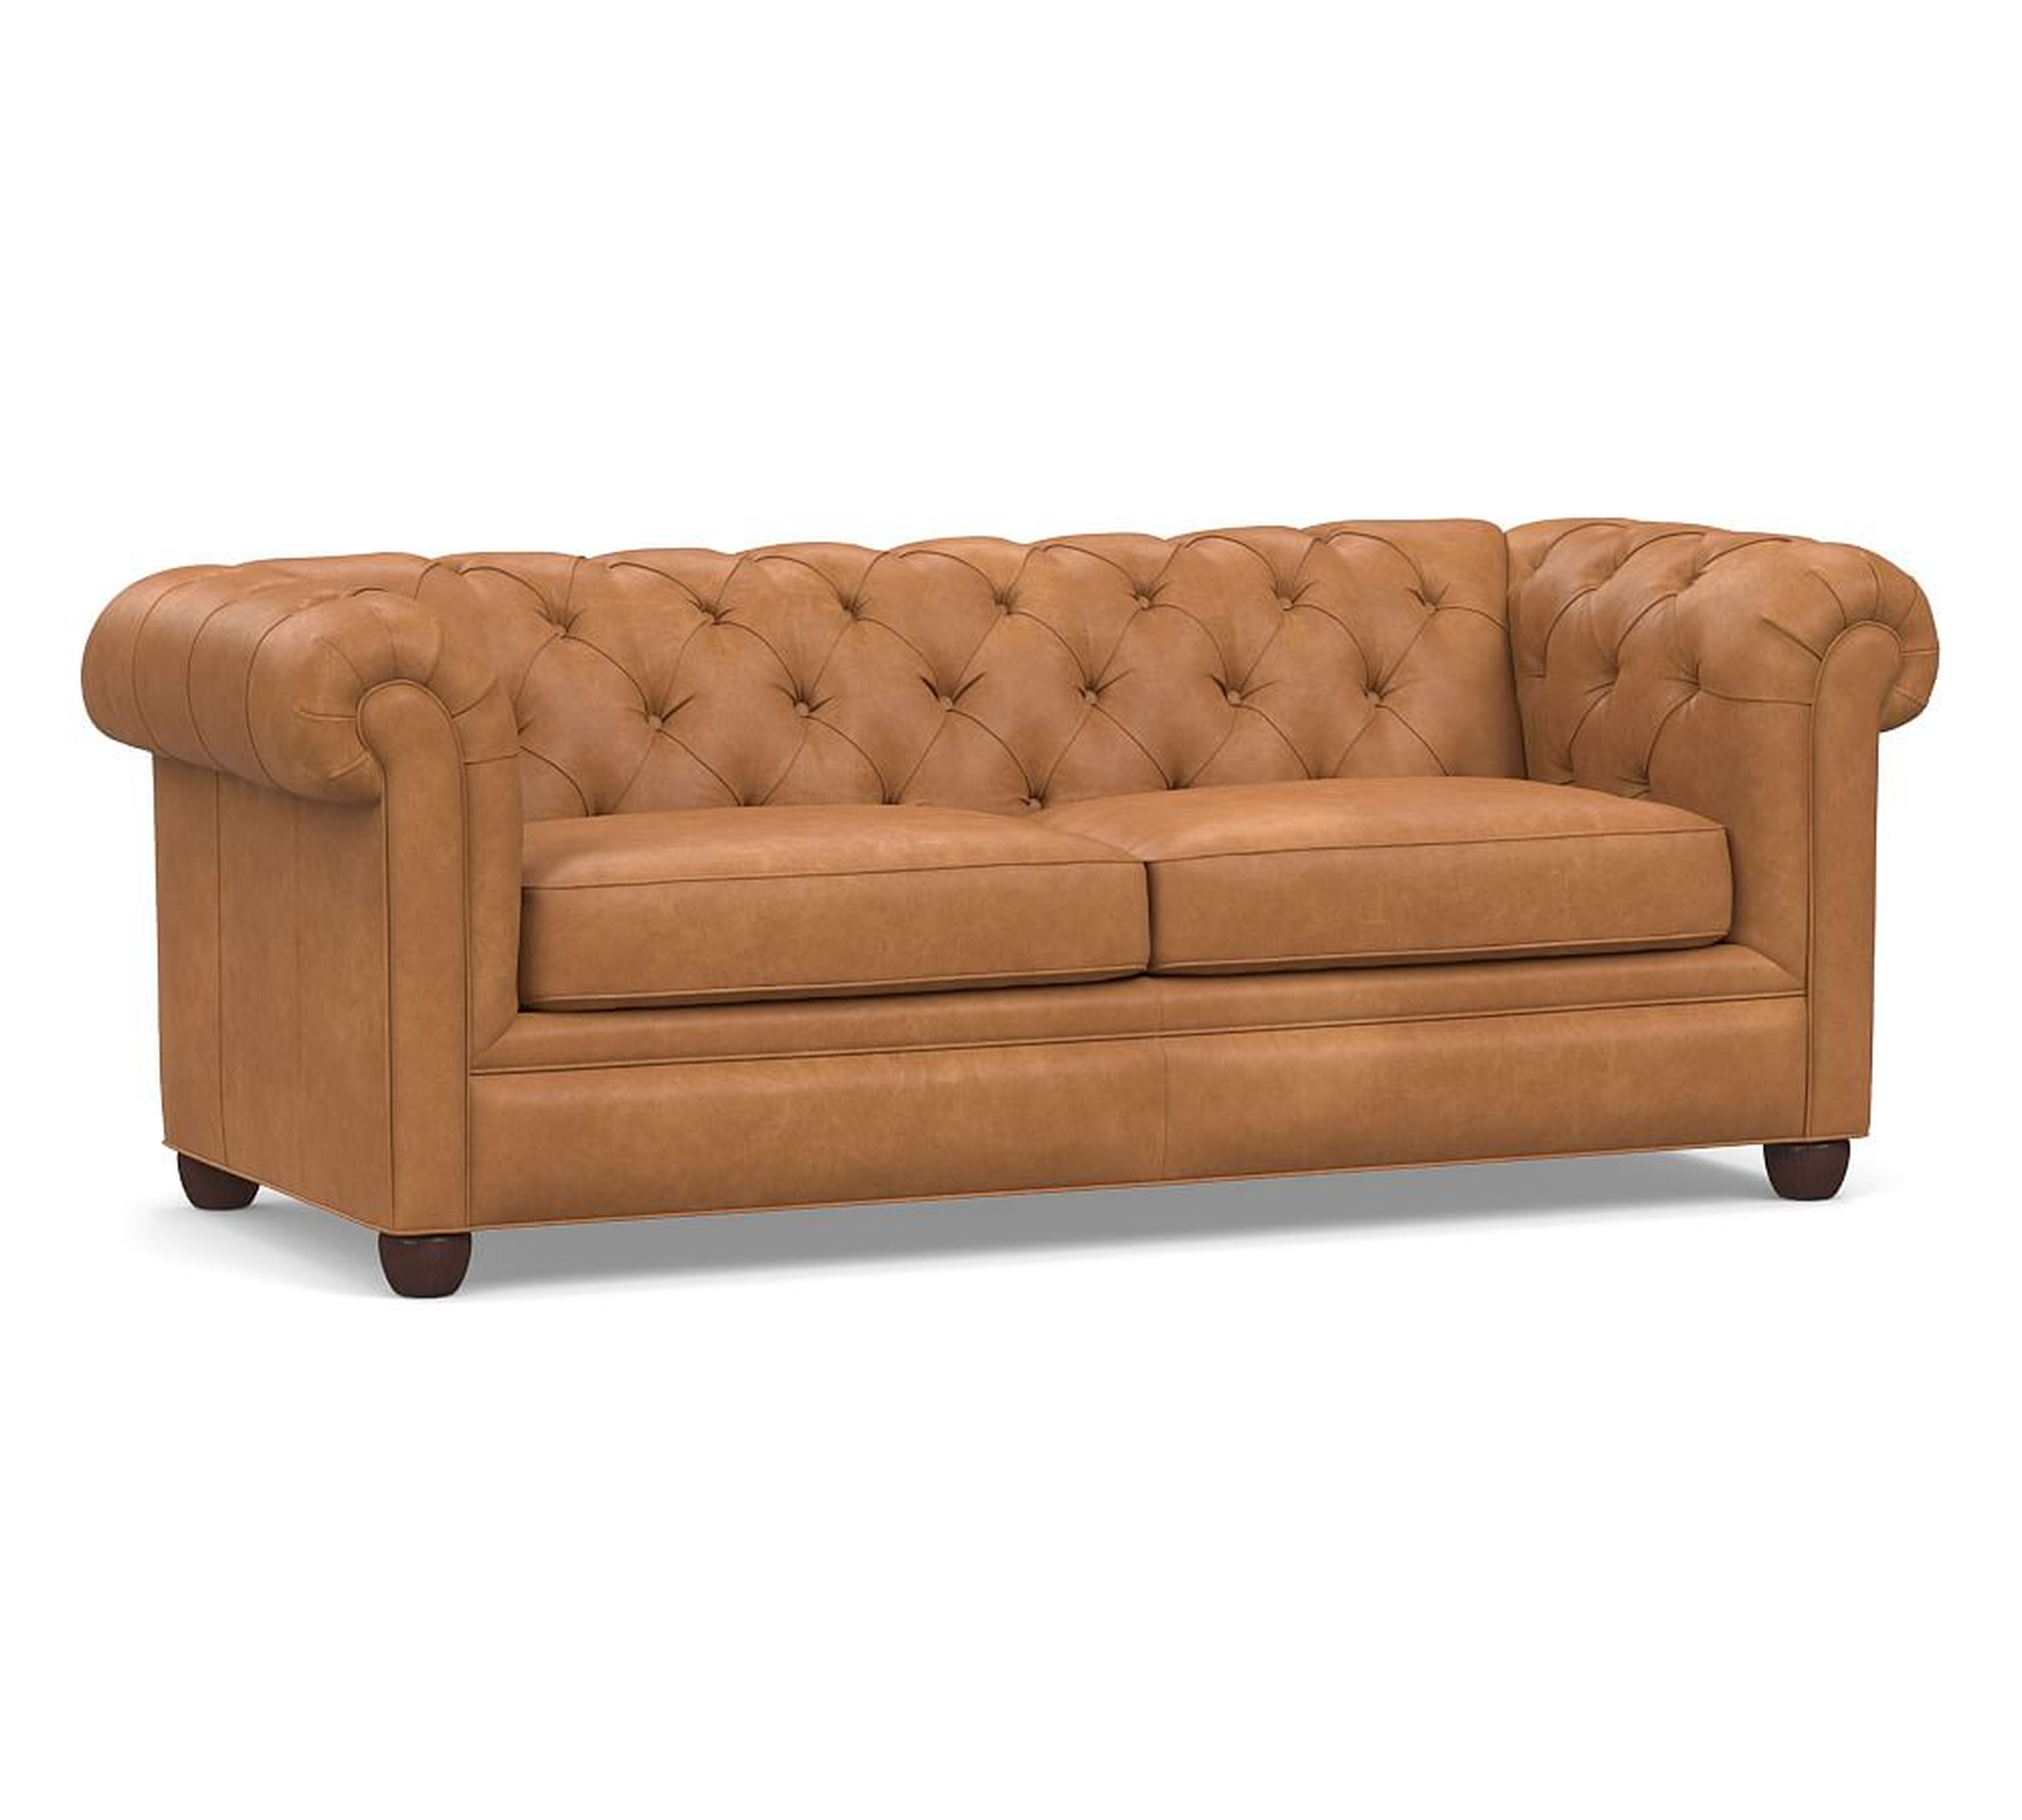 Chesterfield Roll Arm Leather Sofa 86", Polyester Wrapped Cushions, Churchfield Camel - Pottery Barn